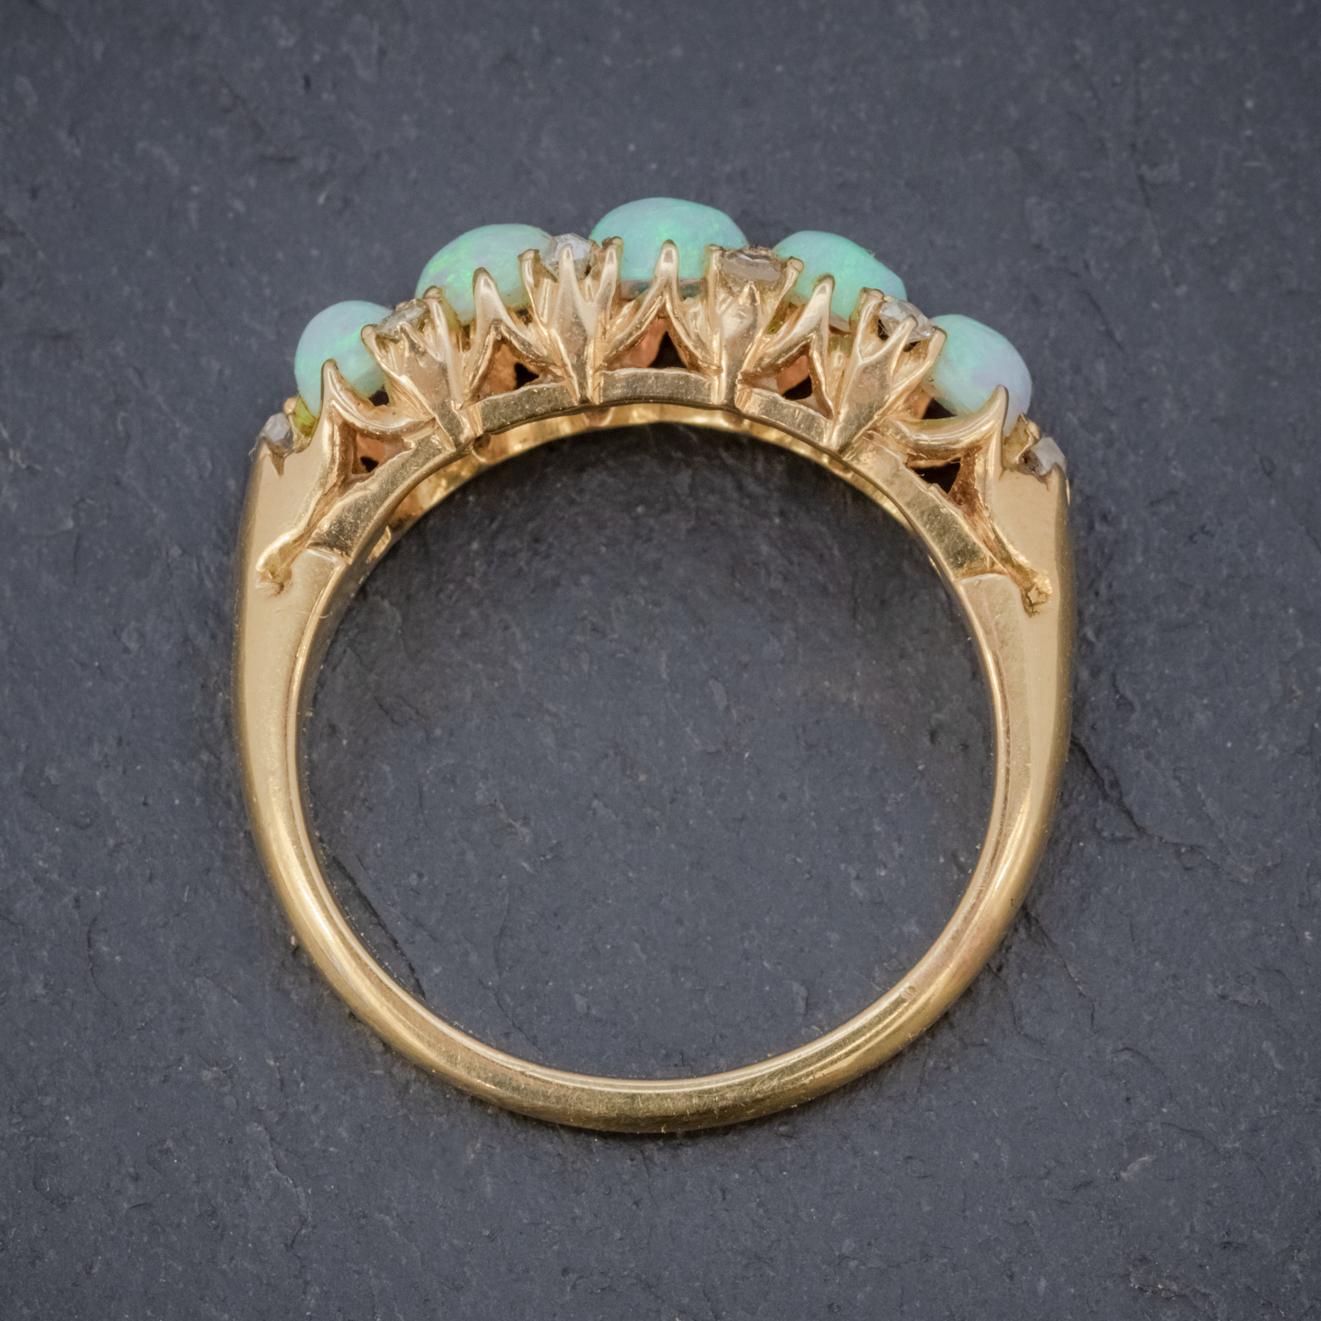 Women's Antique Victorian Opal Diamond Ring 18 Carat Gold circa 1880 Boxed For Sale